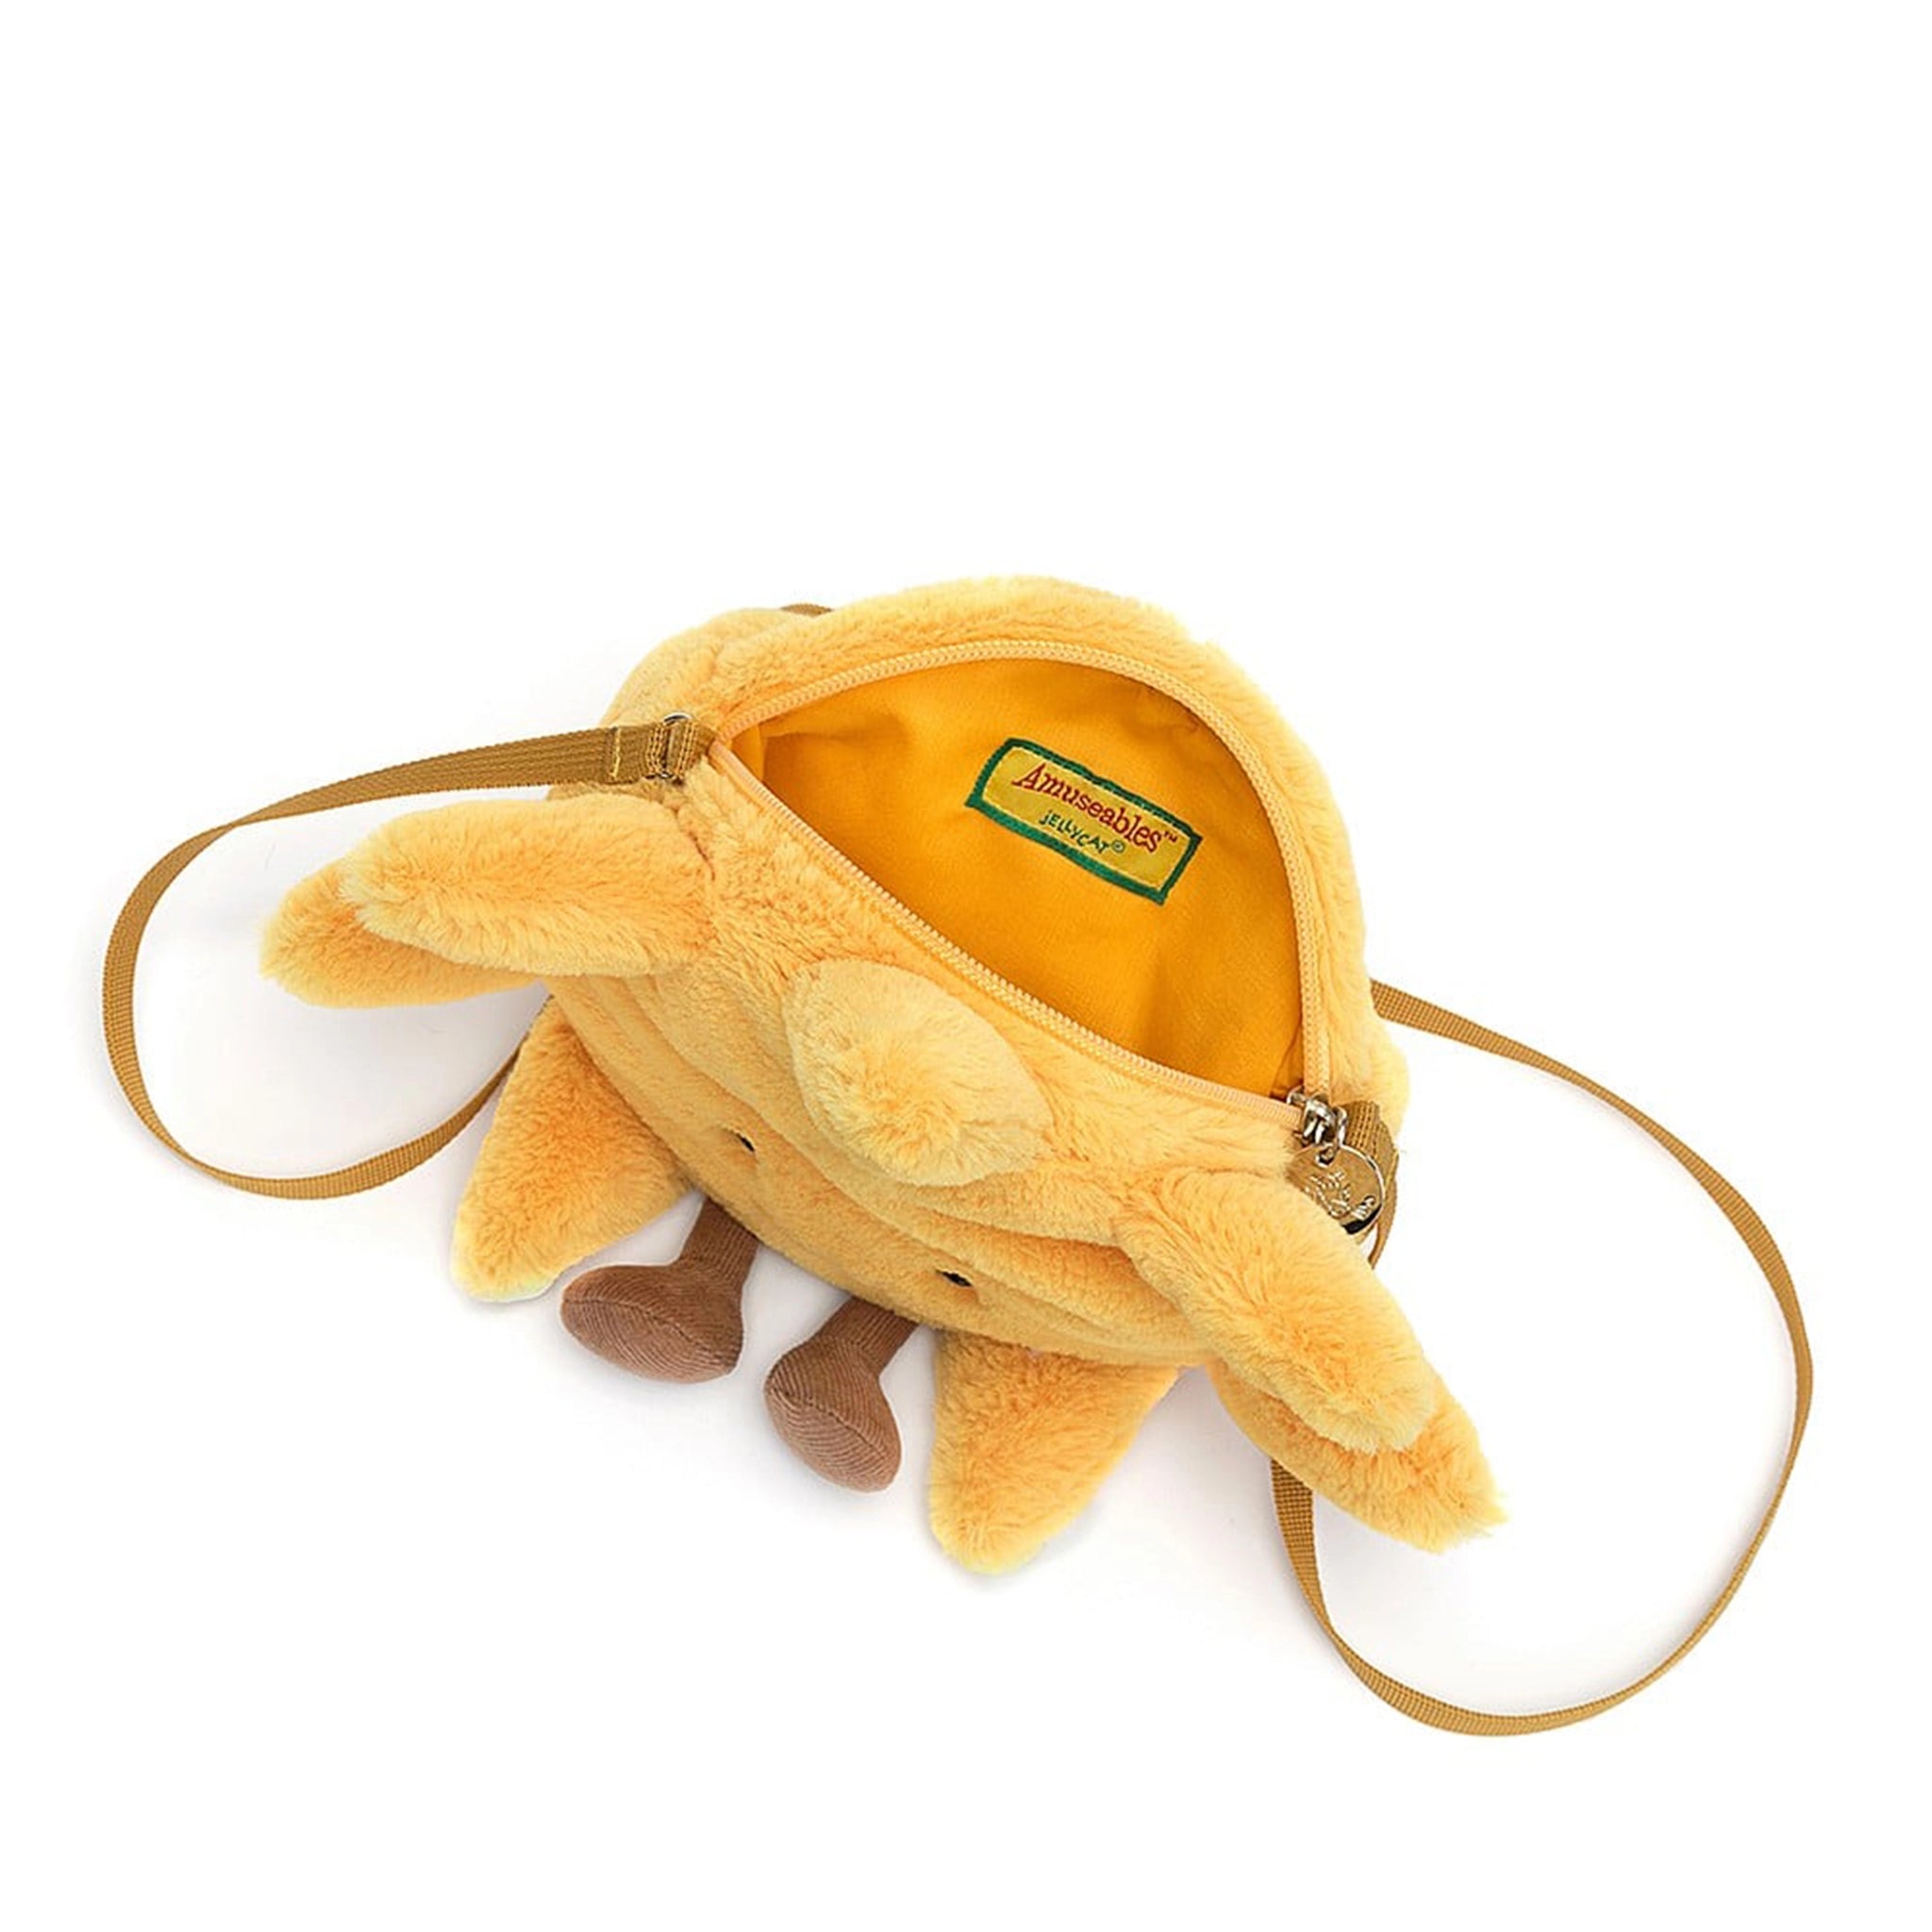 On a white background is fuzzy yellow sun bag with a brown strap and a zipper opening at the top.